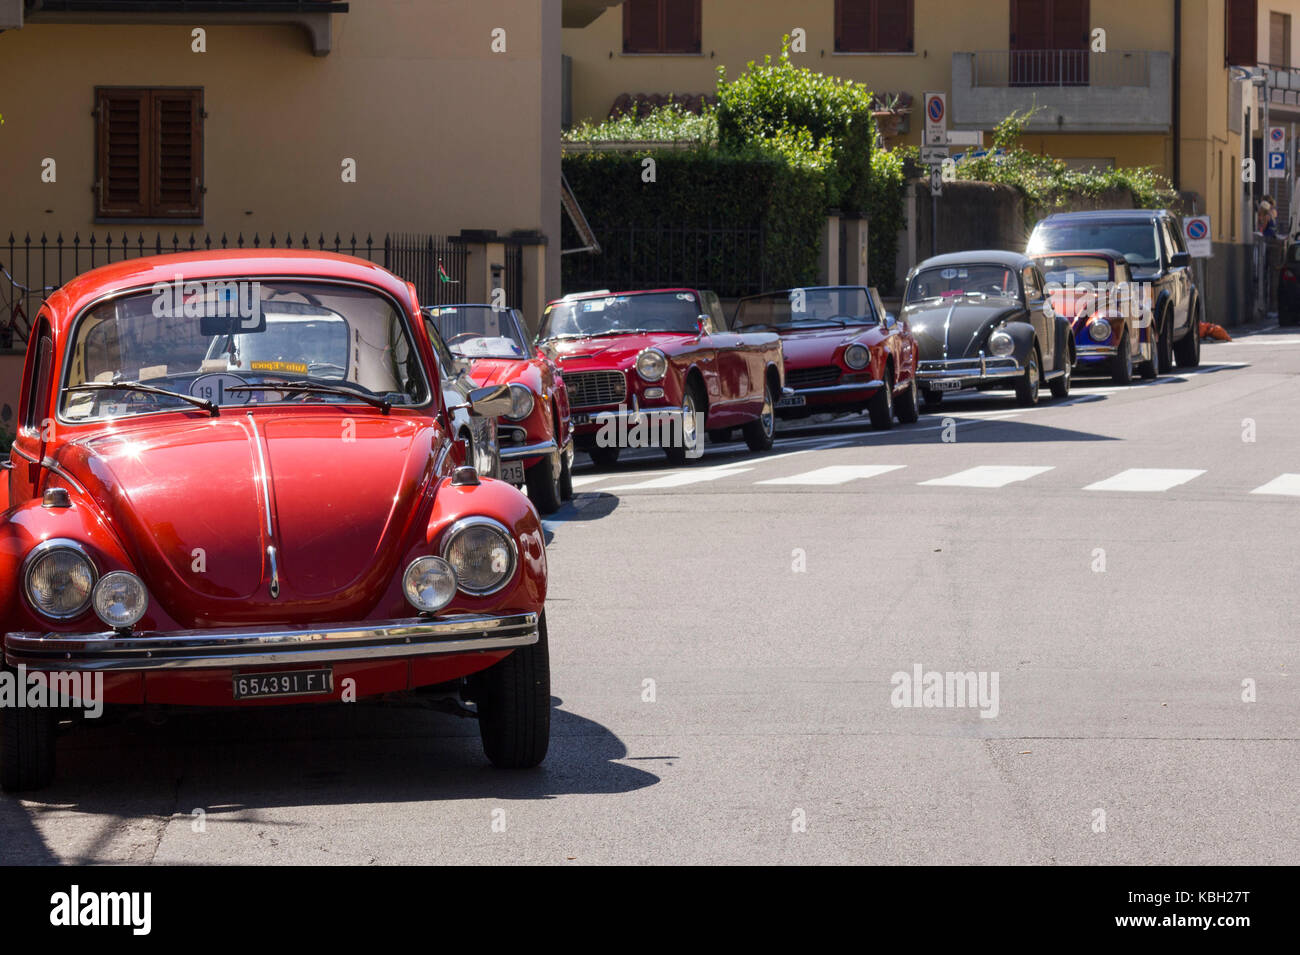 LASTRA A SIGNA, ITALY - AUGUST 30 2015: Row of vintage cars parked on the street in Lastra a Signa during an historic cars exhibition Stock Photo